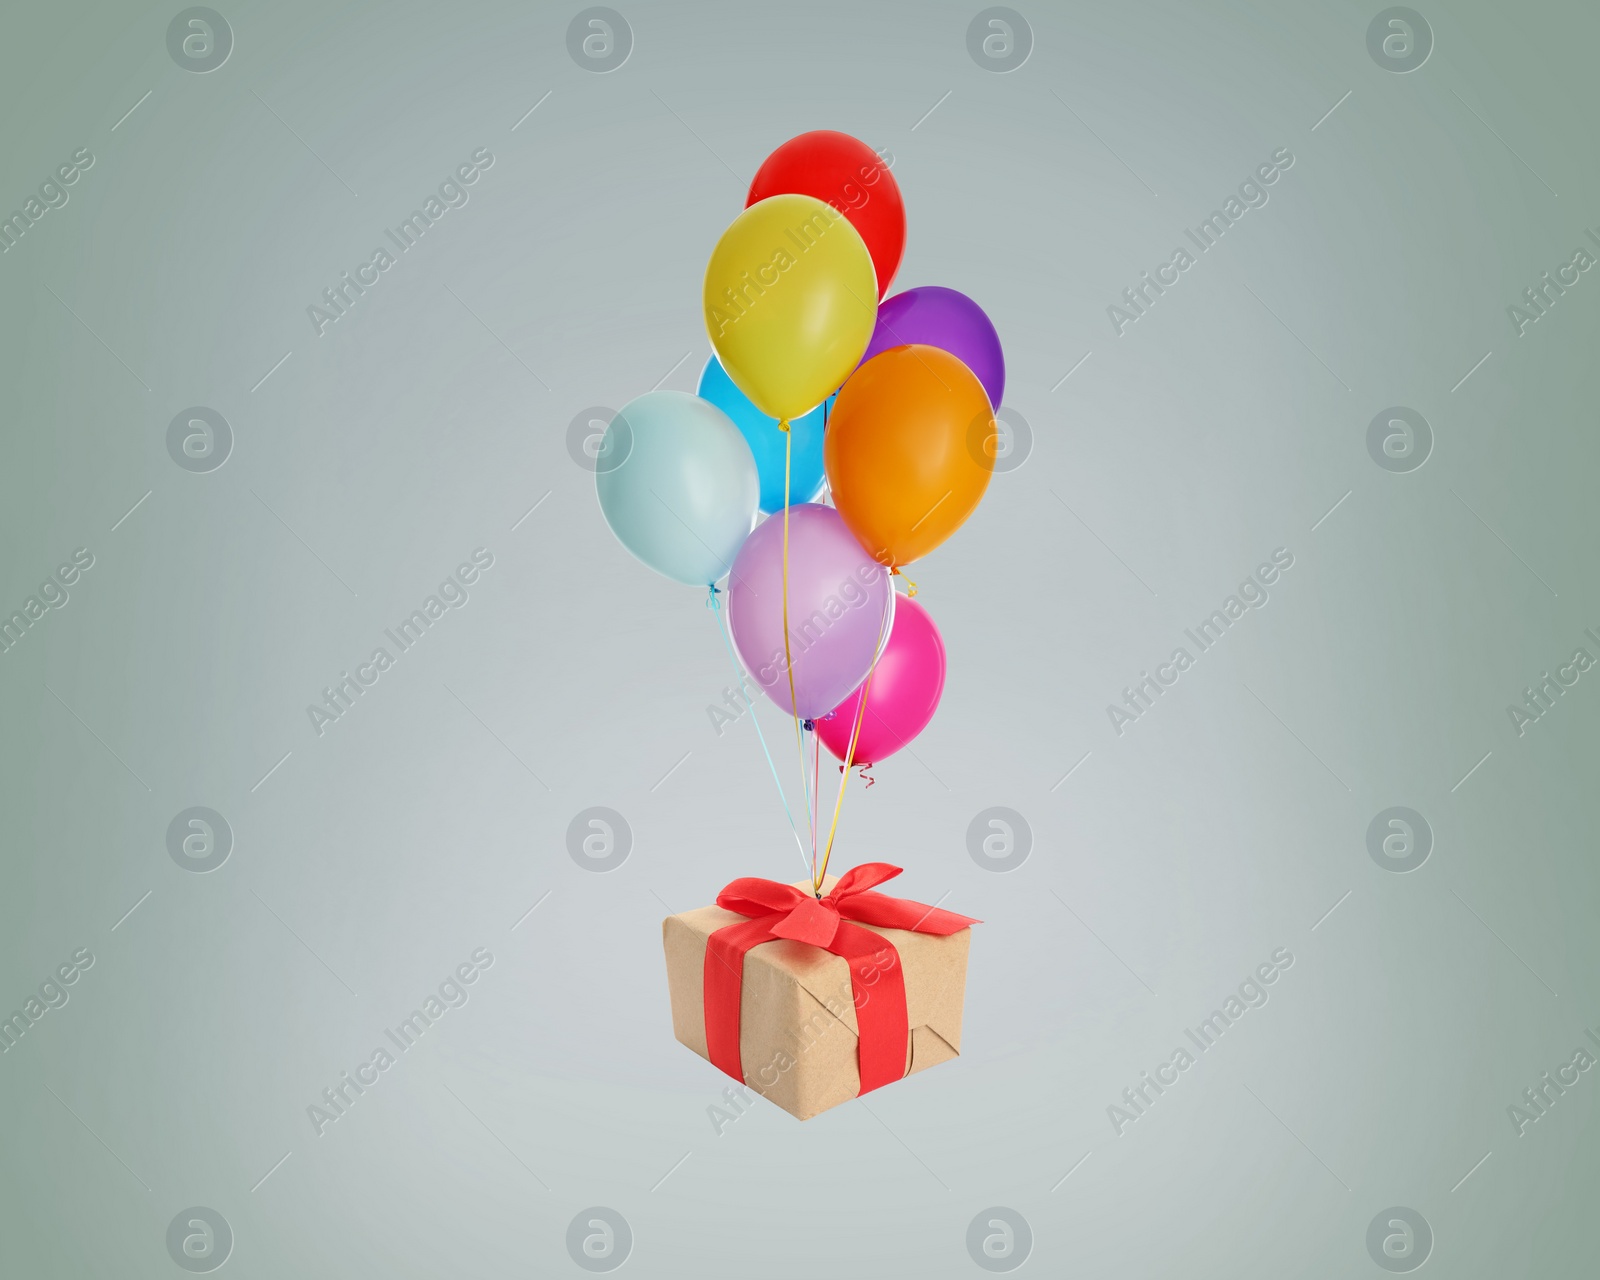 Image of Many balloons tied to gift box on grey background